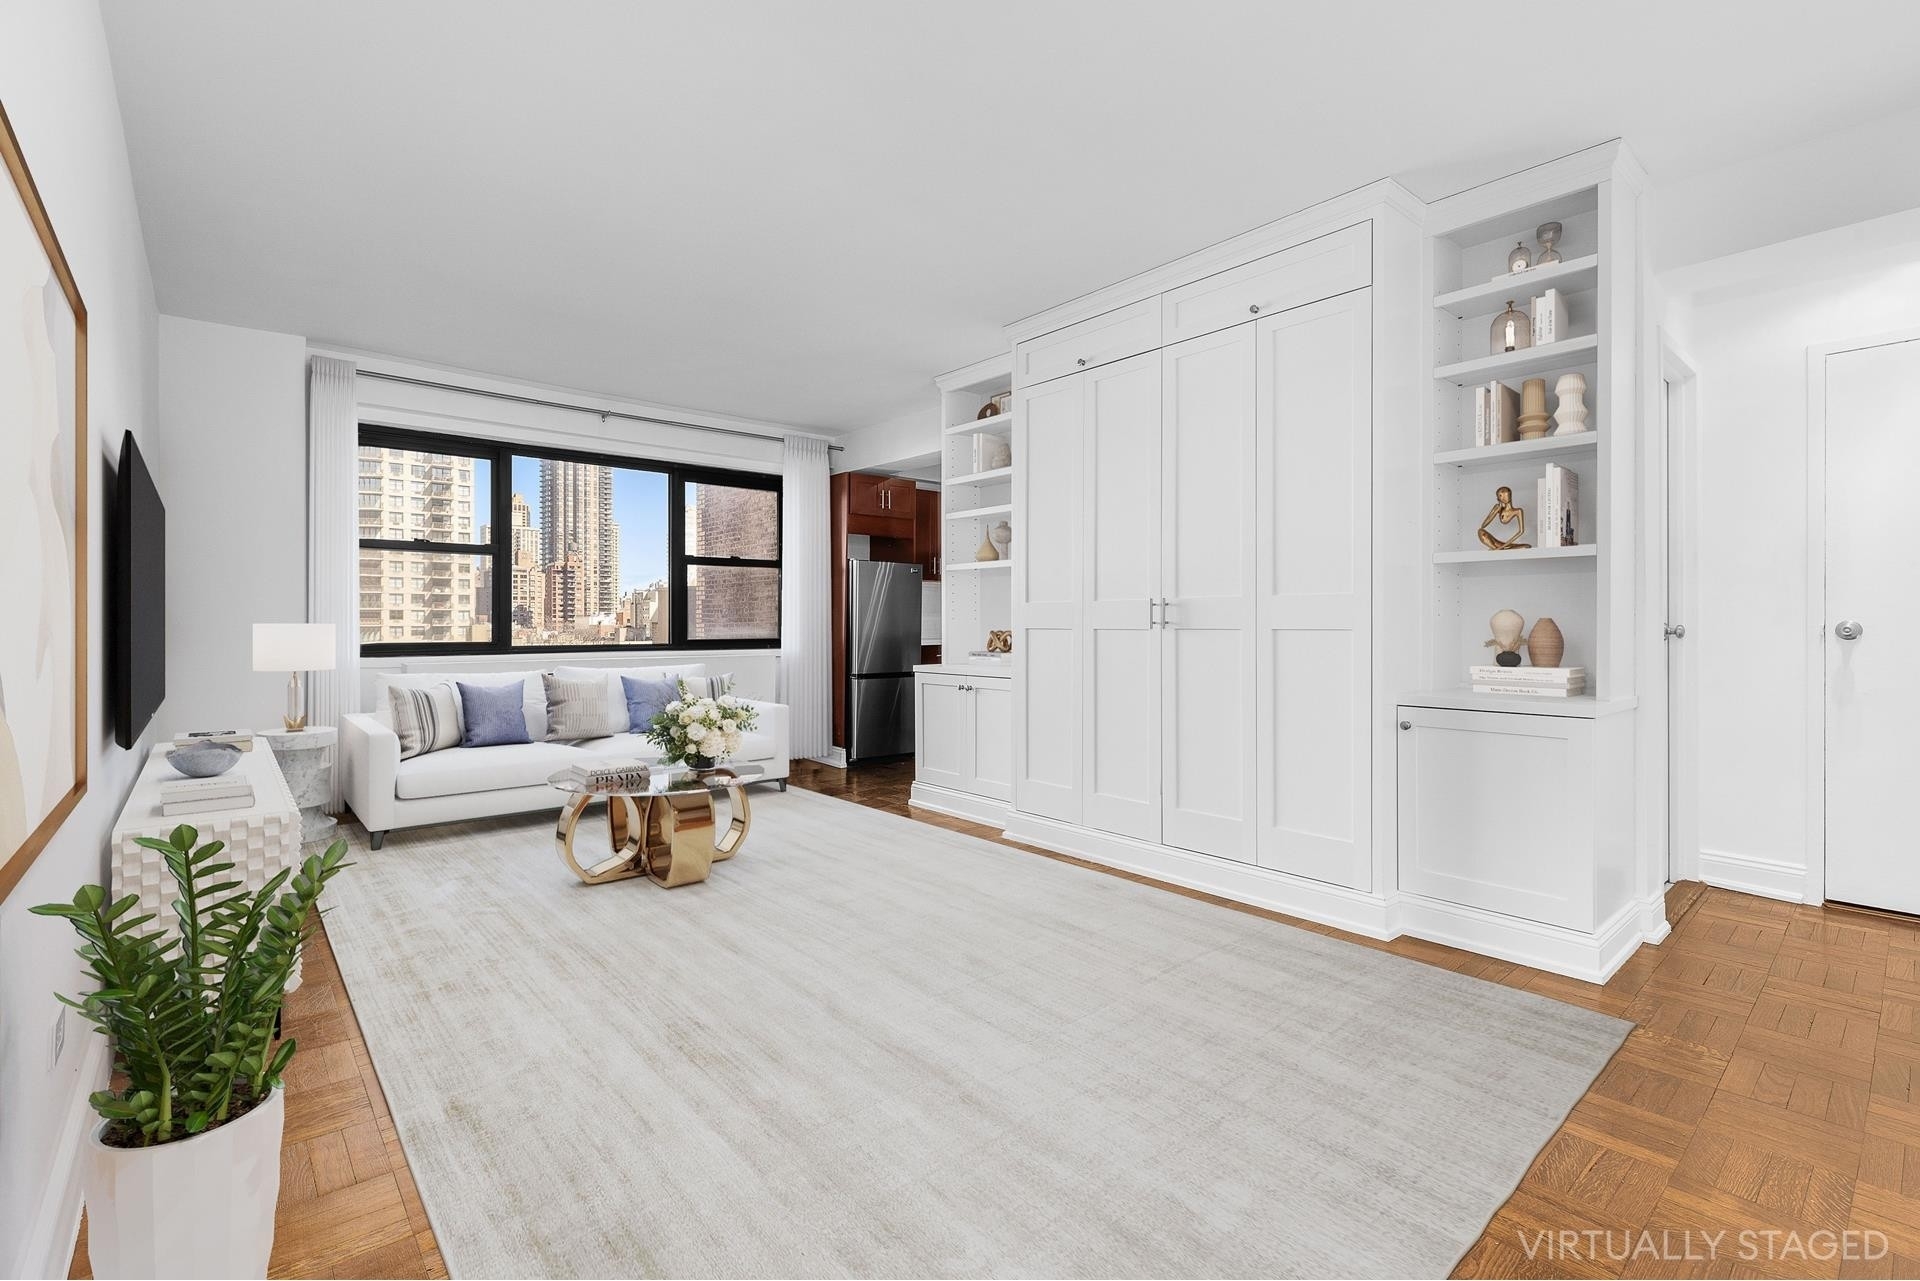 Co-op Properties for Sale at 305 E 72ND ST, 8B Lenox Hill, New York, NY 10021